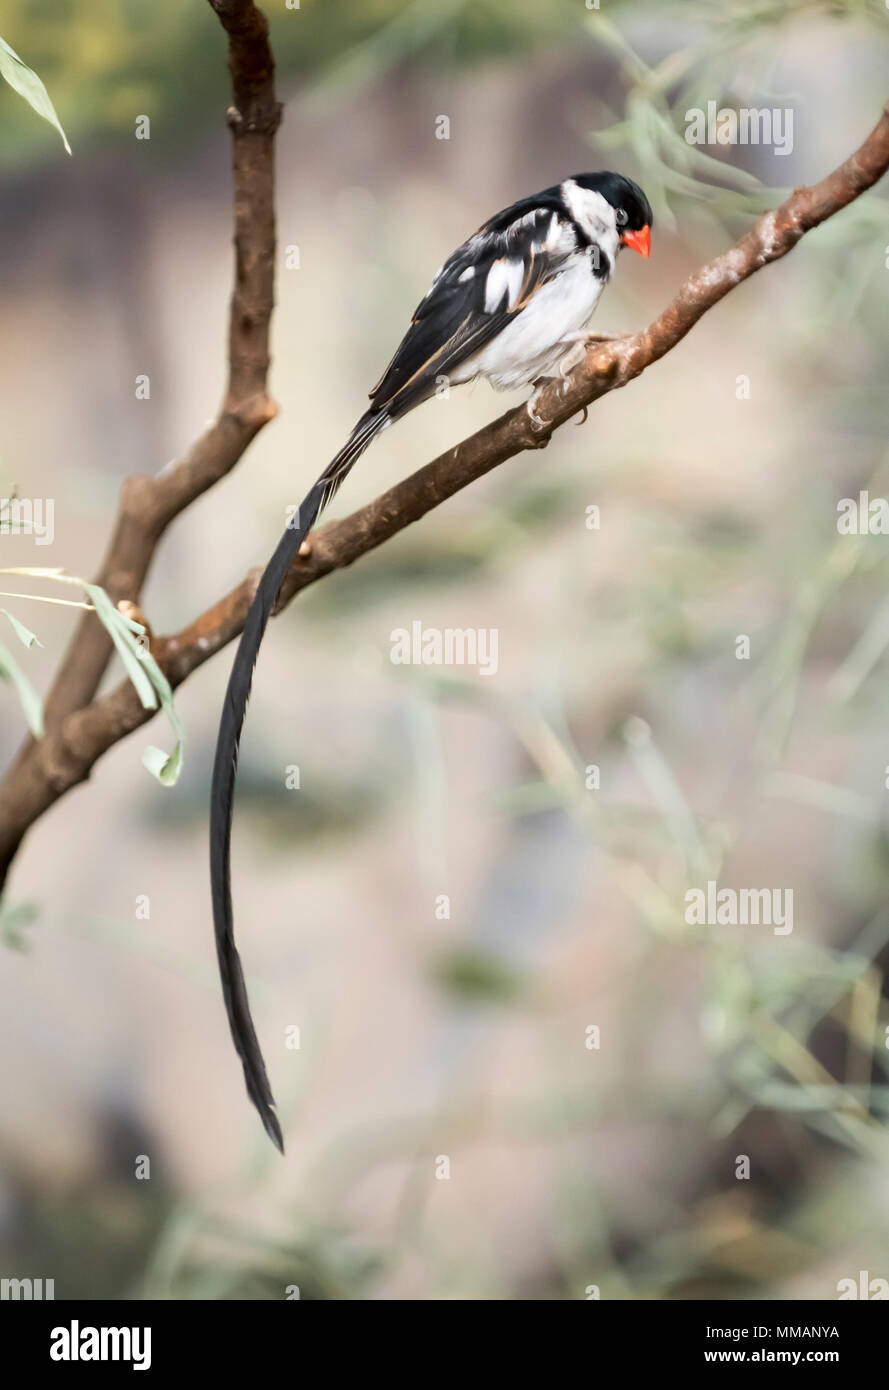 The pin-tailed whydah is a small songbird. It is a resident breeding bird in most of Africa south of the Sahara Desert. Stock Photo